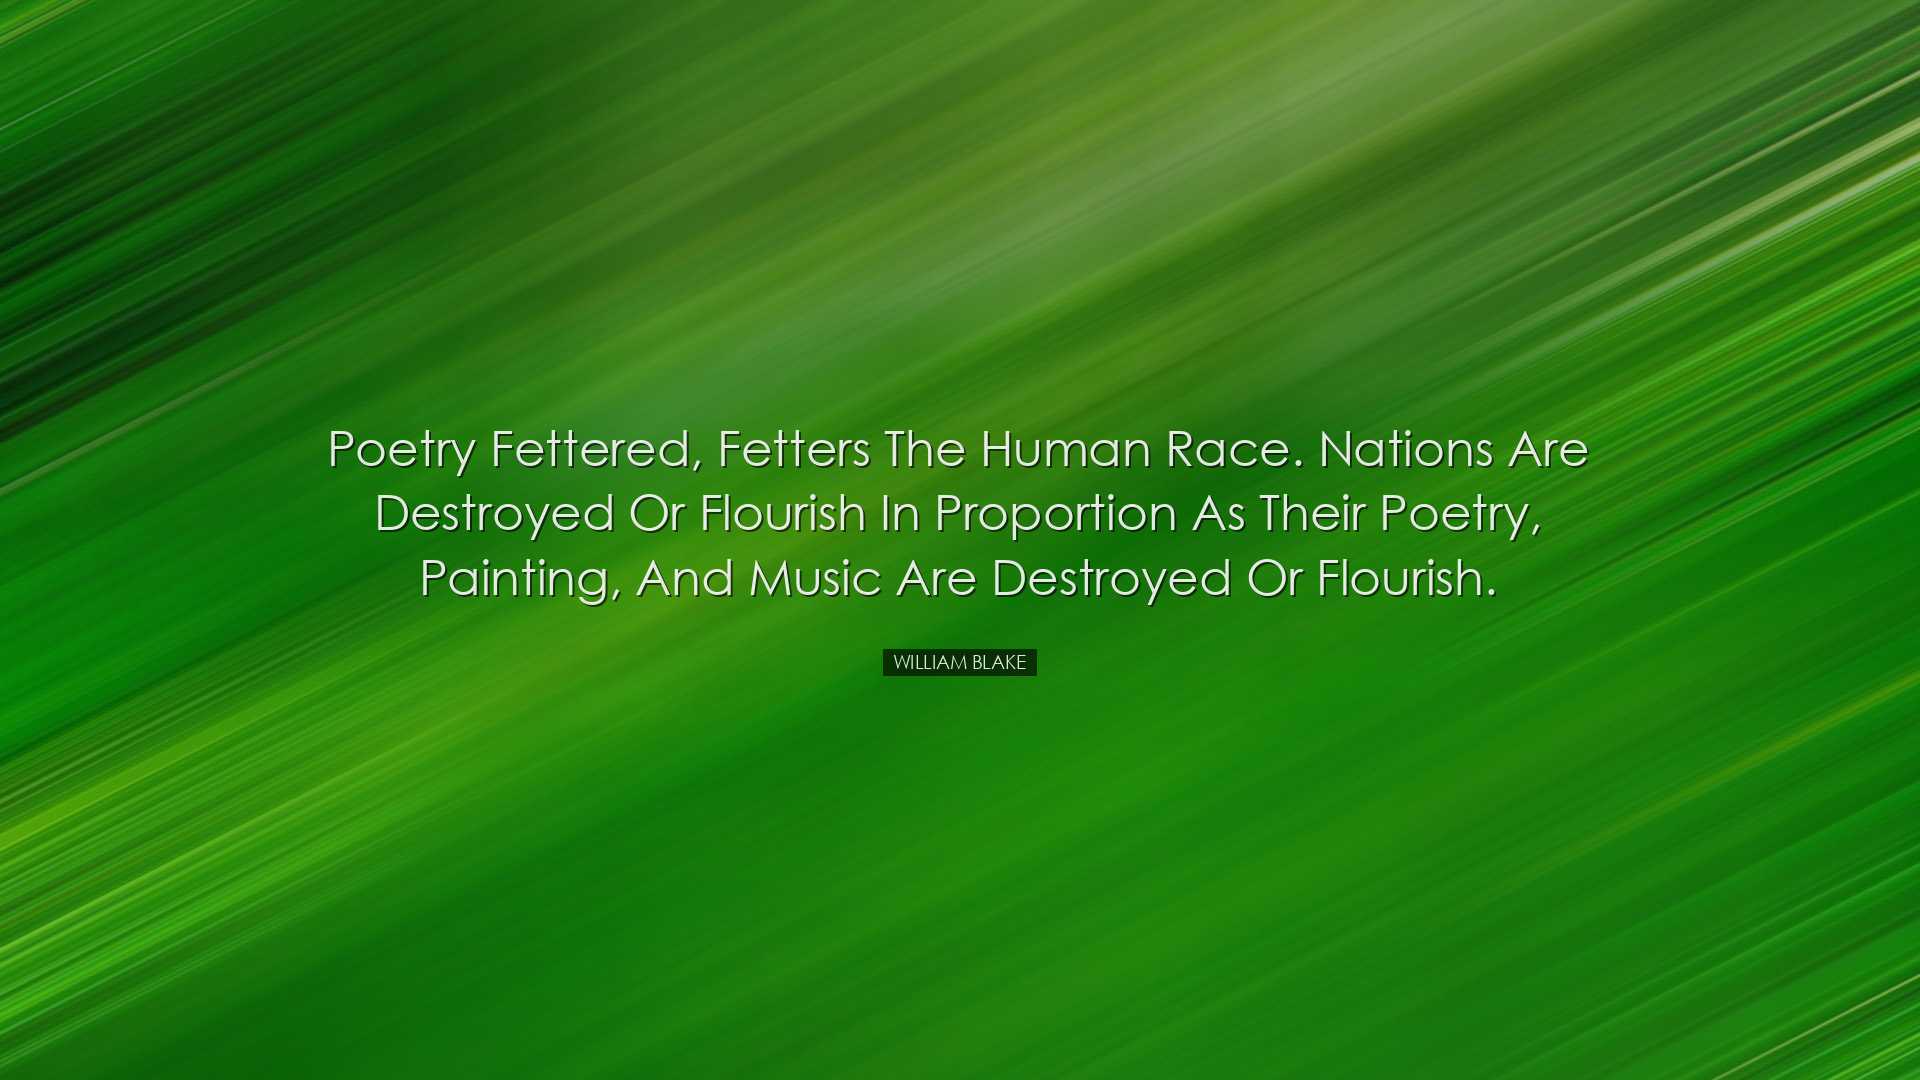 Poetry fettered, fetters the human race. Nations are destroyed or